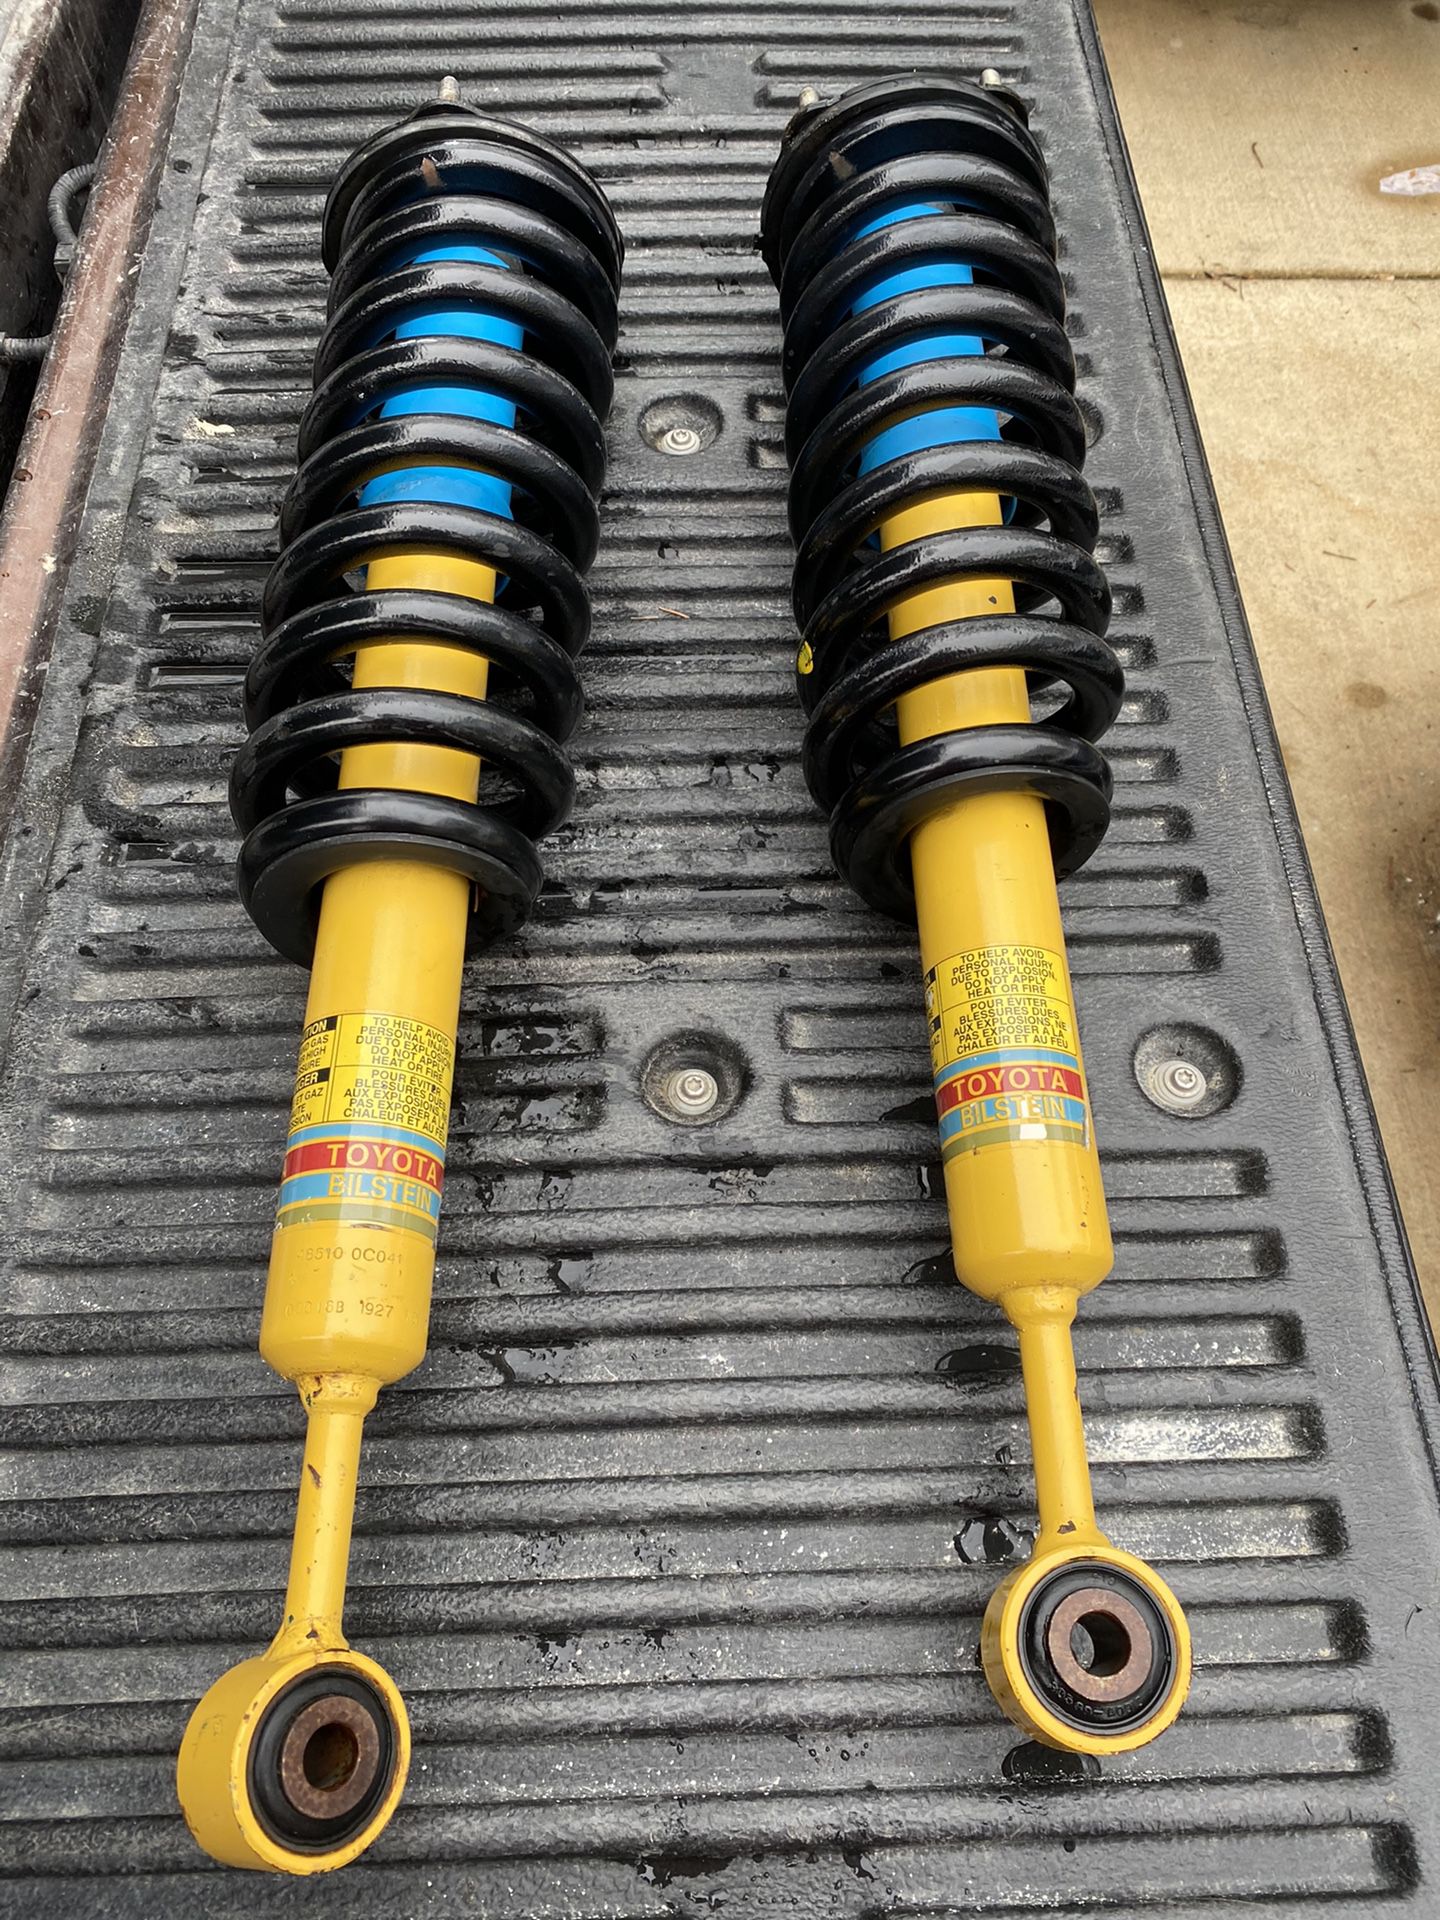 2019 Toyota Tundra TRD BILSTEIN from shocks with the spring only 3500 miles on it will fit 2007 to present